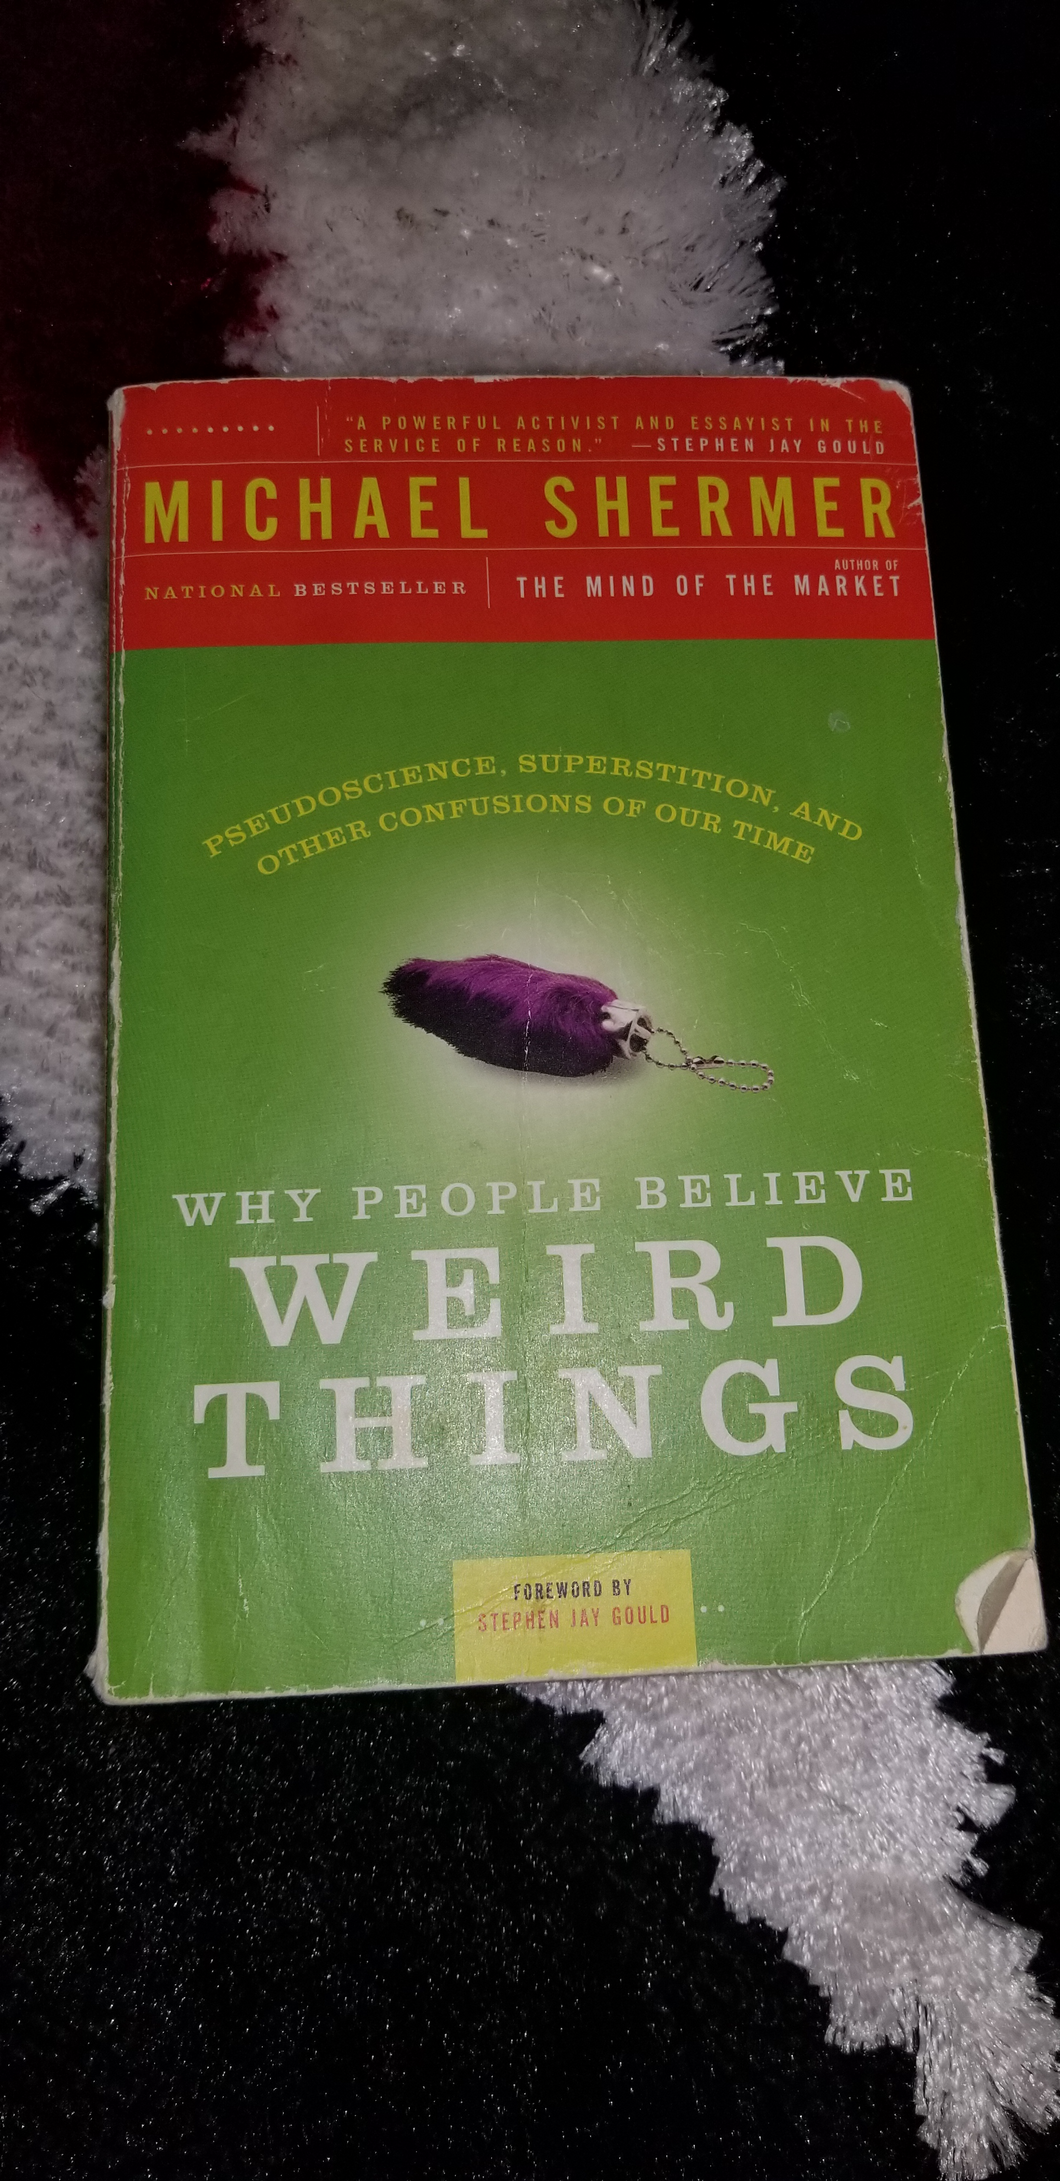 Why People Believe Weird Things: Pseudoscience, Superstition, and Other Confusions of Our Time - Perfume Gallery